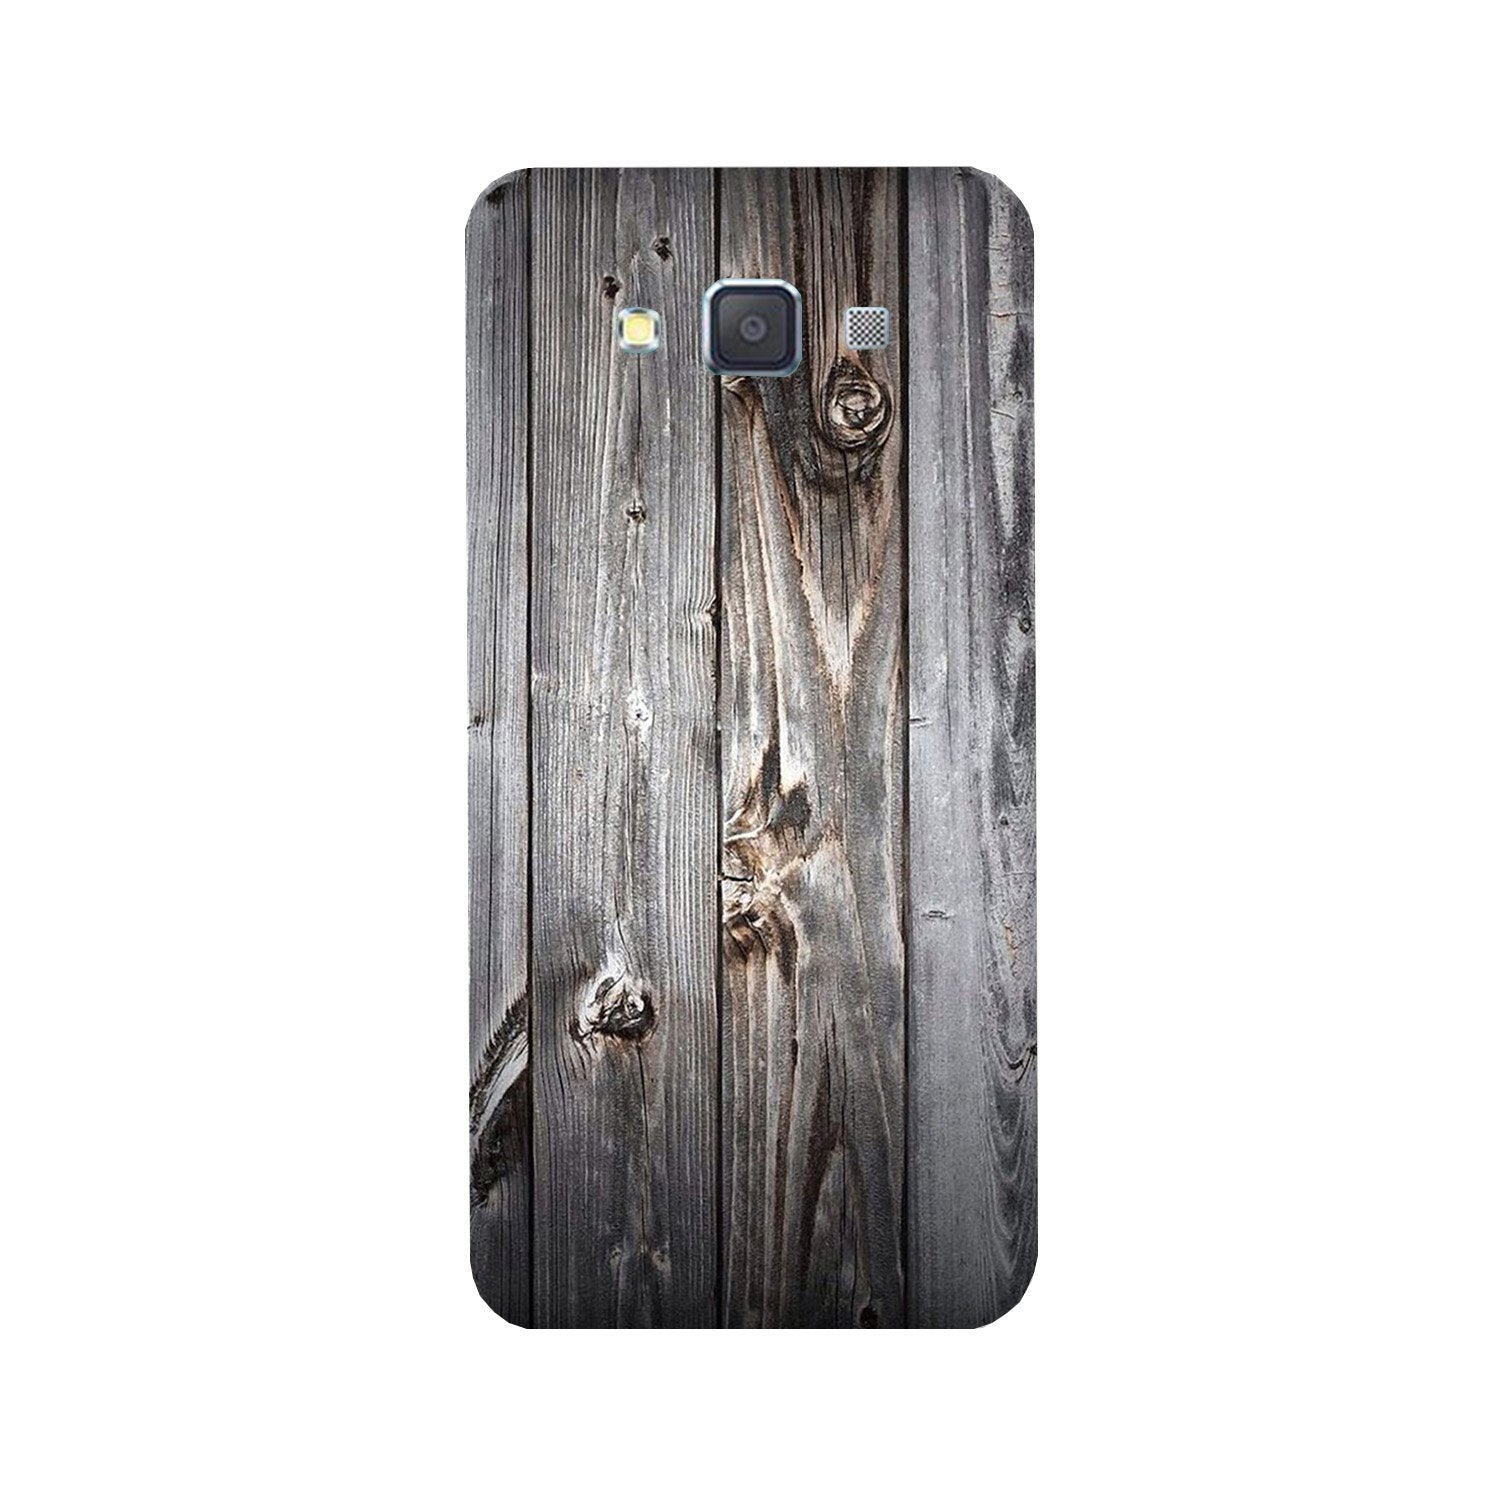 Wooden Look Case for Galaxy Grand 2(Design - 114)